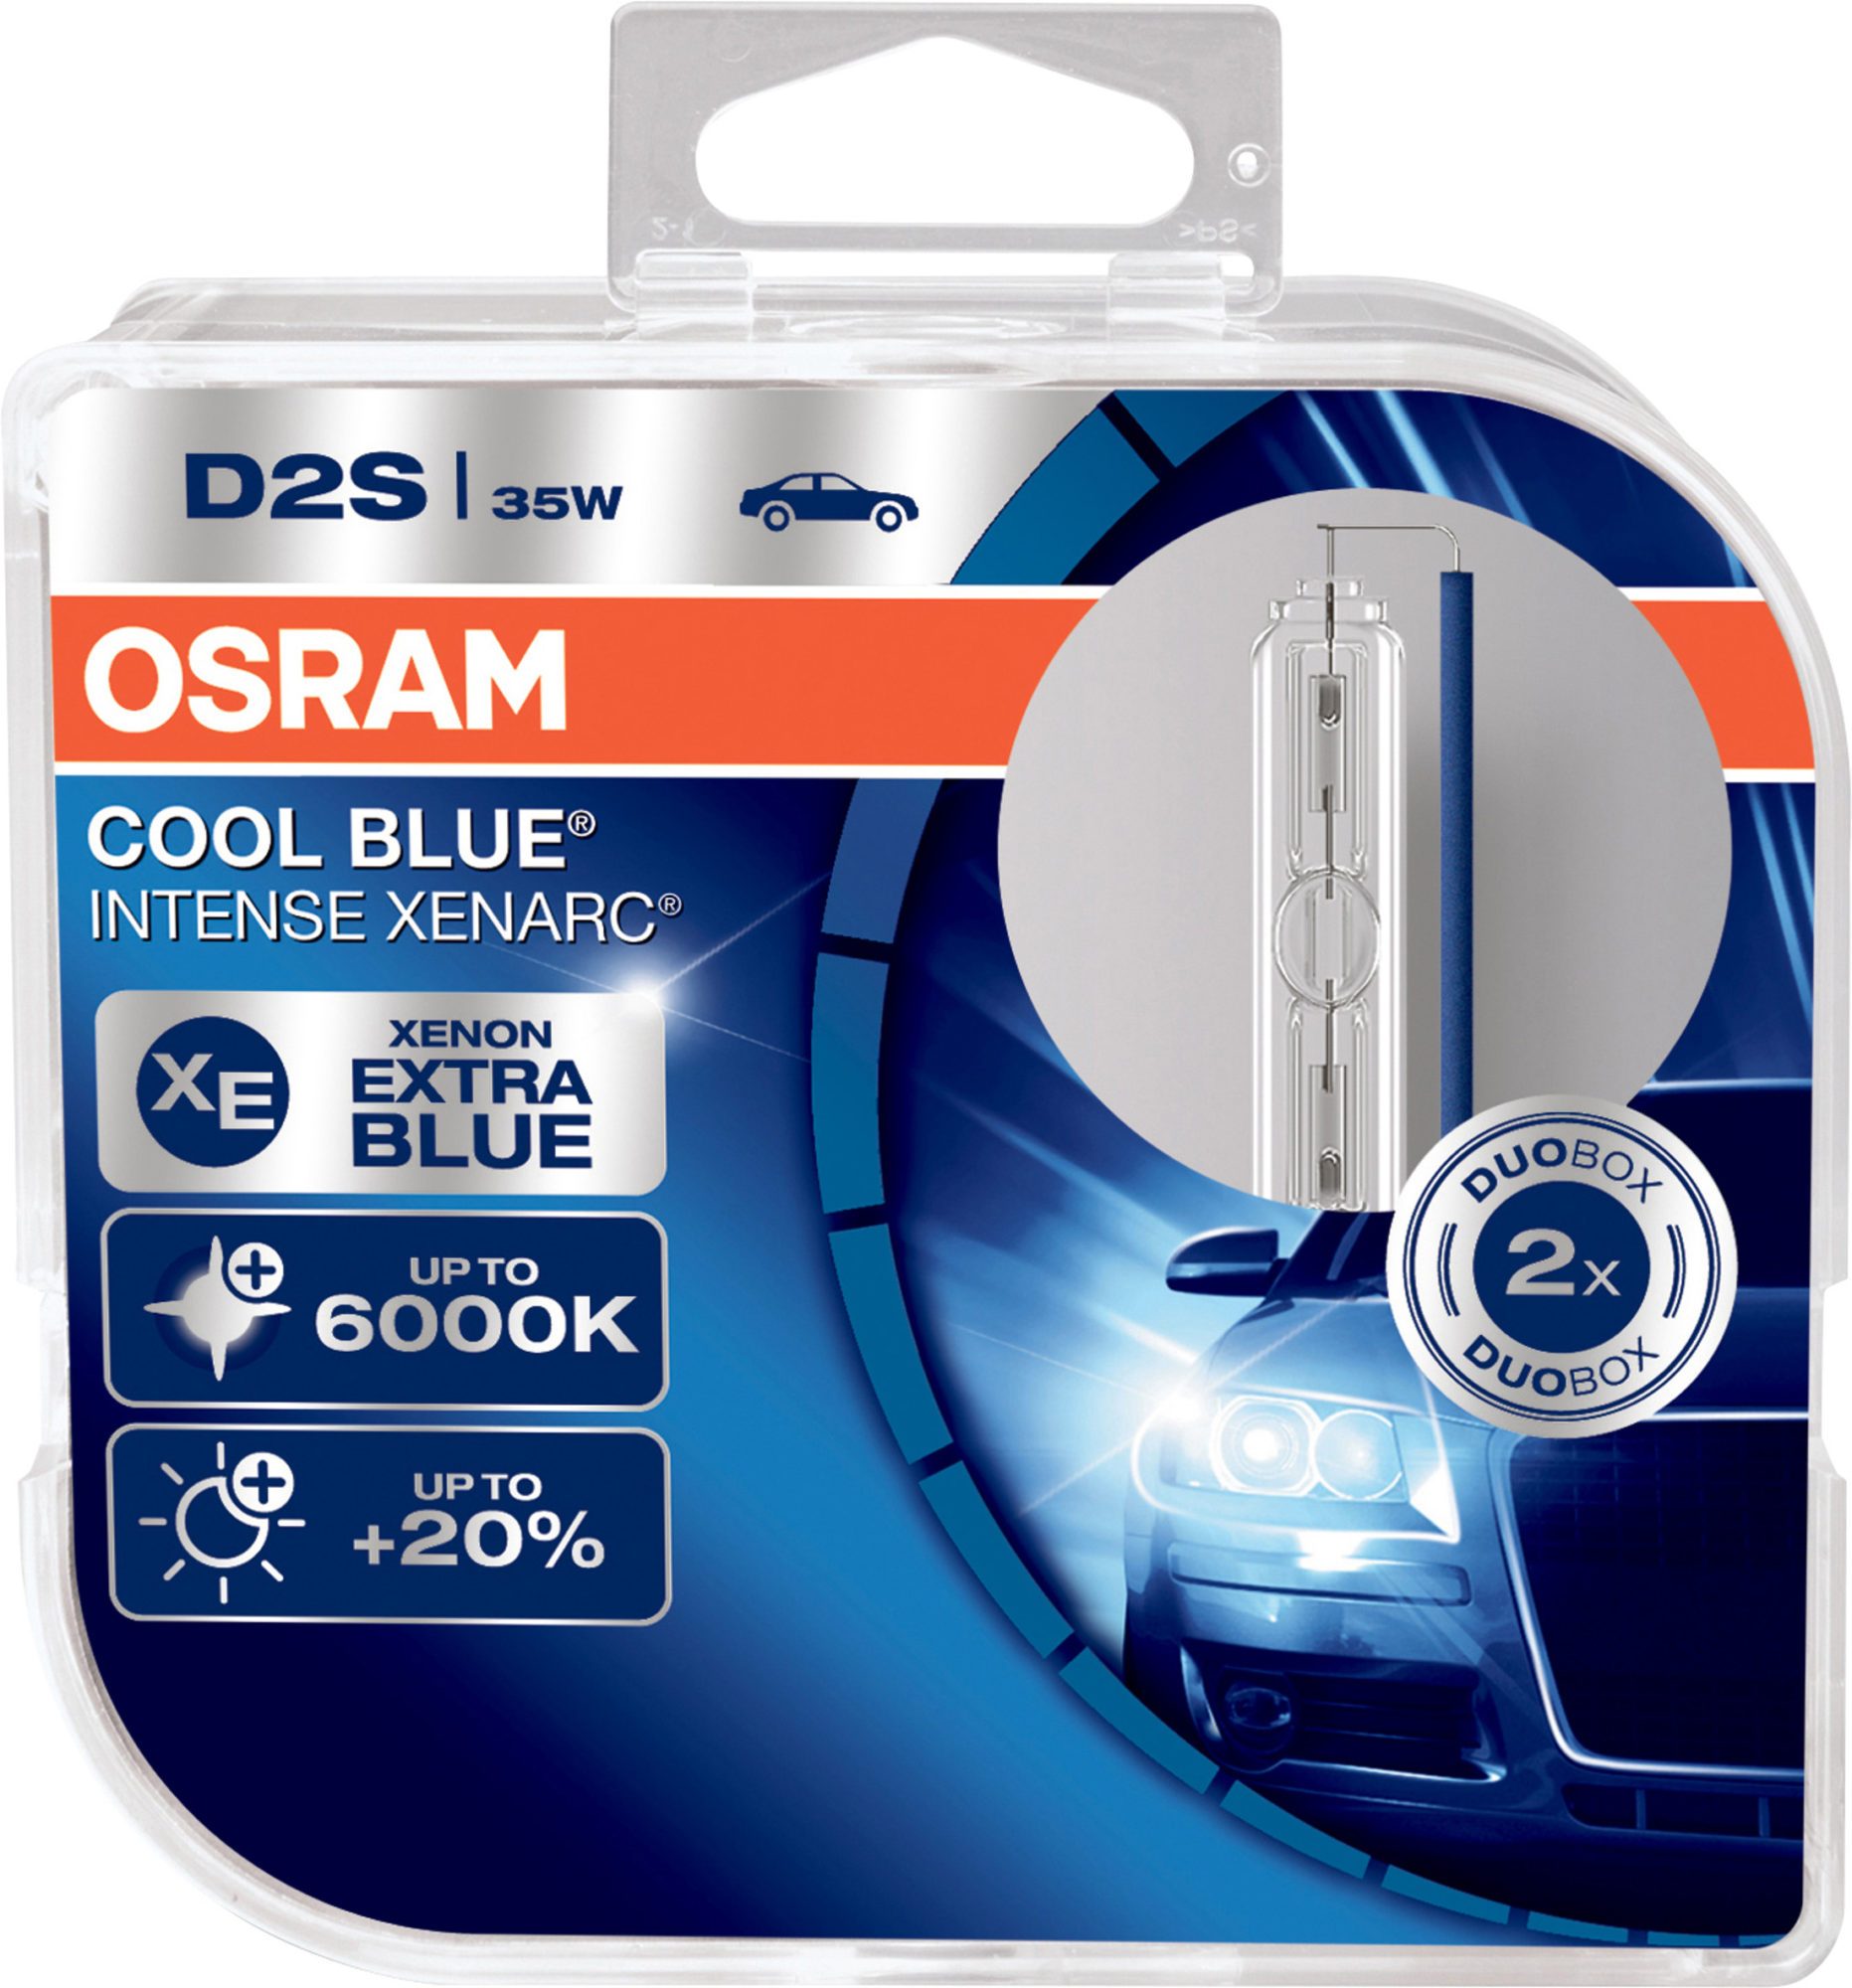 Rendezvous Injustice Dent Buy OSRAM HID and Halogen bulbs with free shipping!